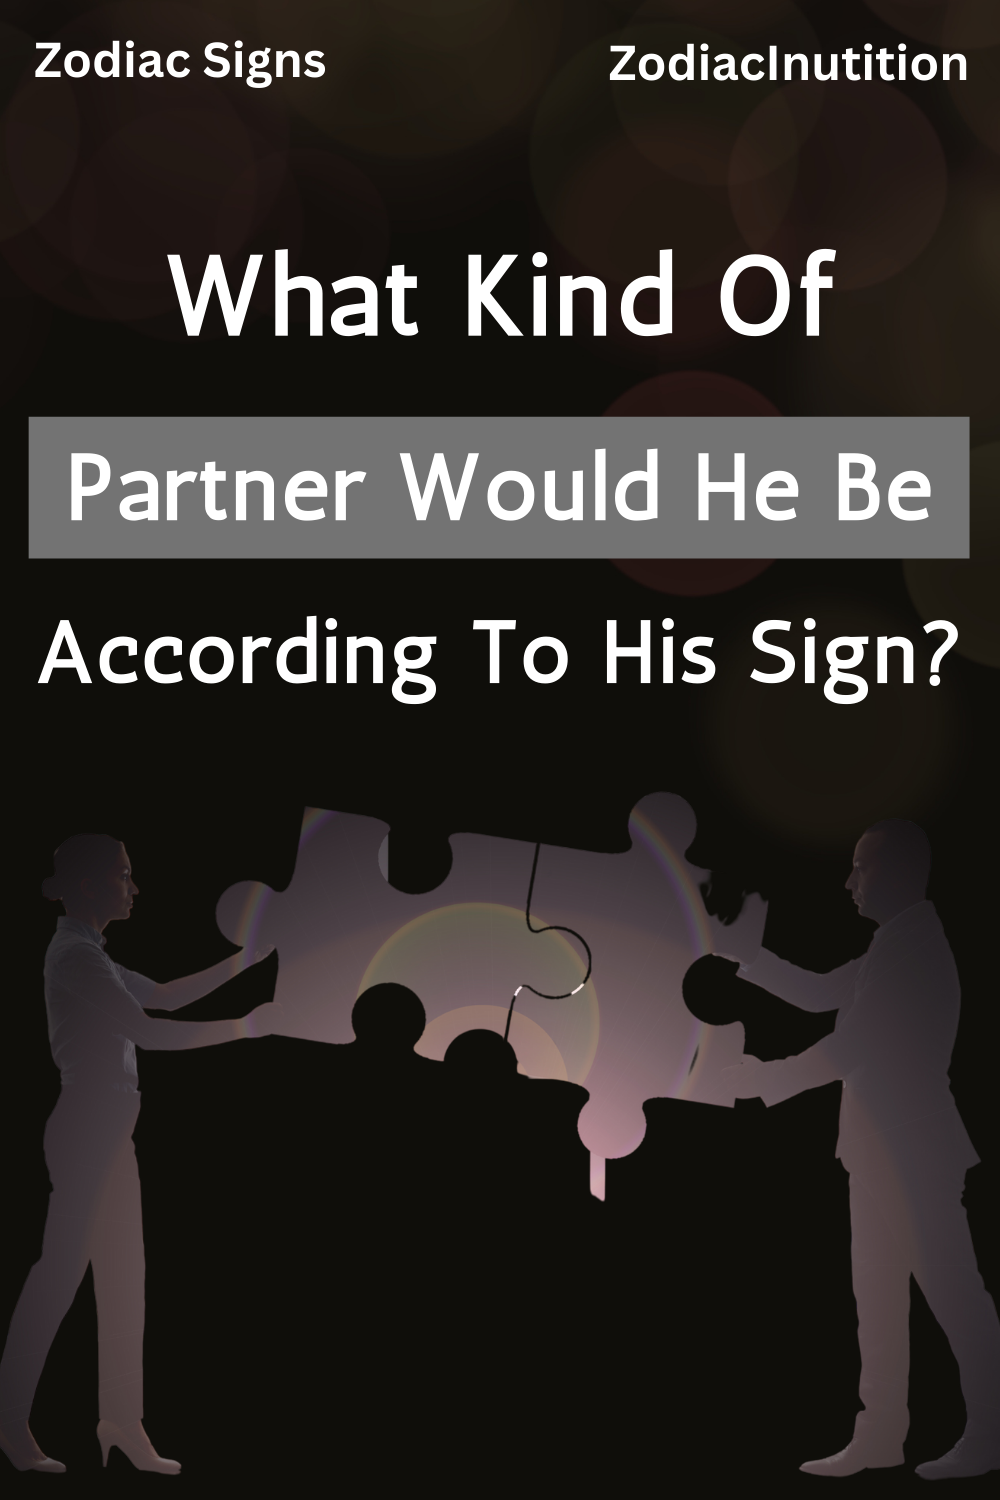 What Kind Of Partner Would He Be According To His Sign?